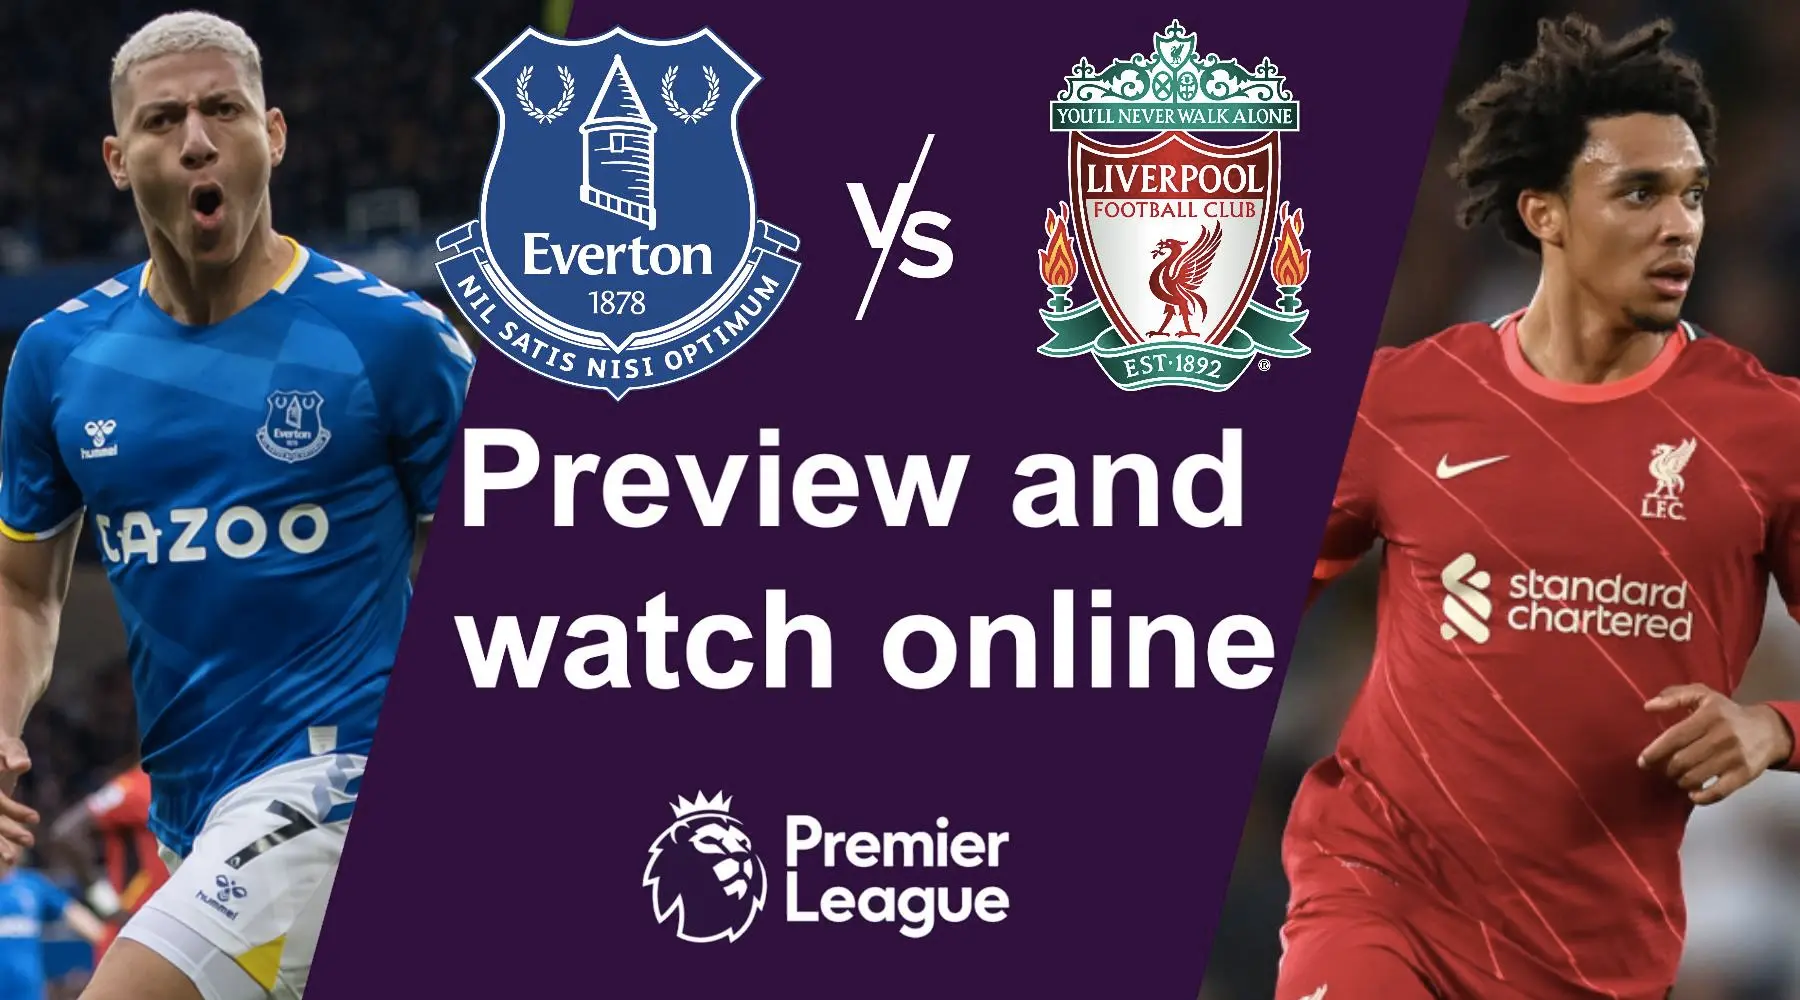 How to watch Everton vs Liverpool Premier League live and match preview